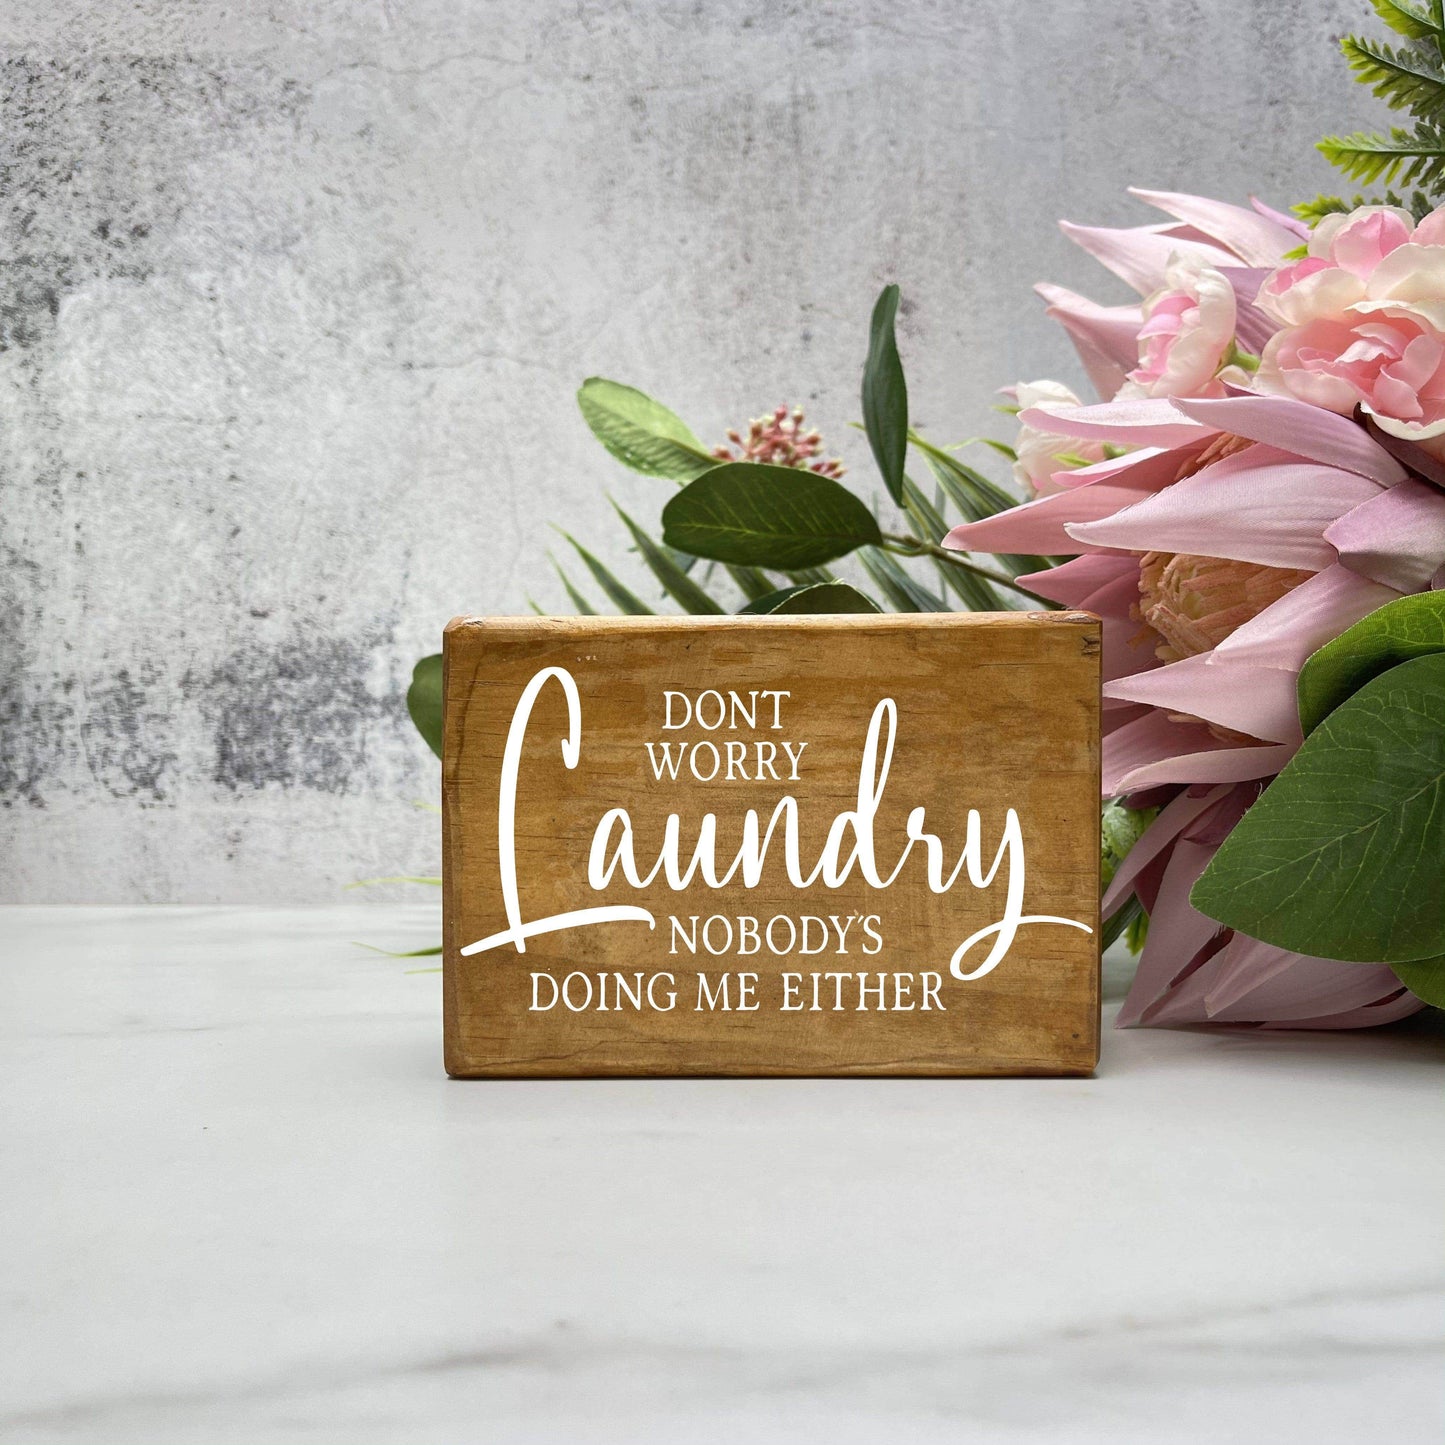 Don't worry Laundry, Nobody is doing me either, laundry wood sign, laundry decor, home decor